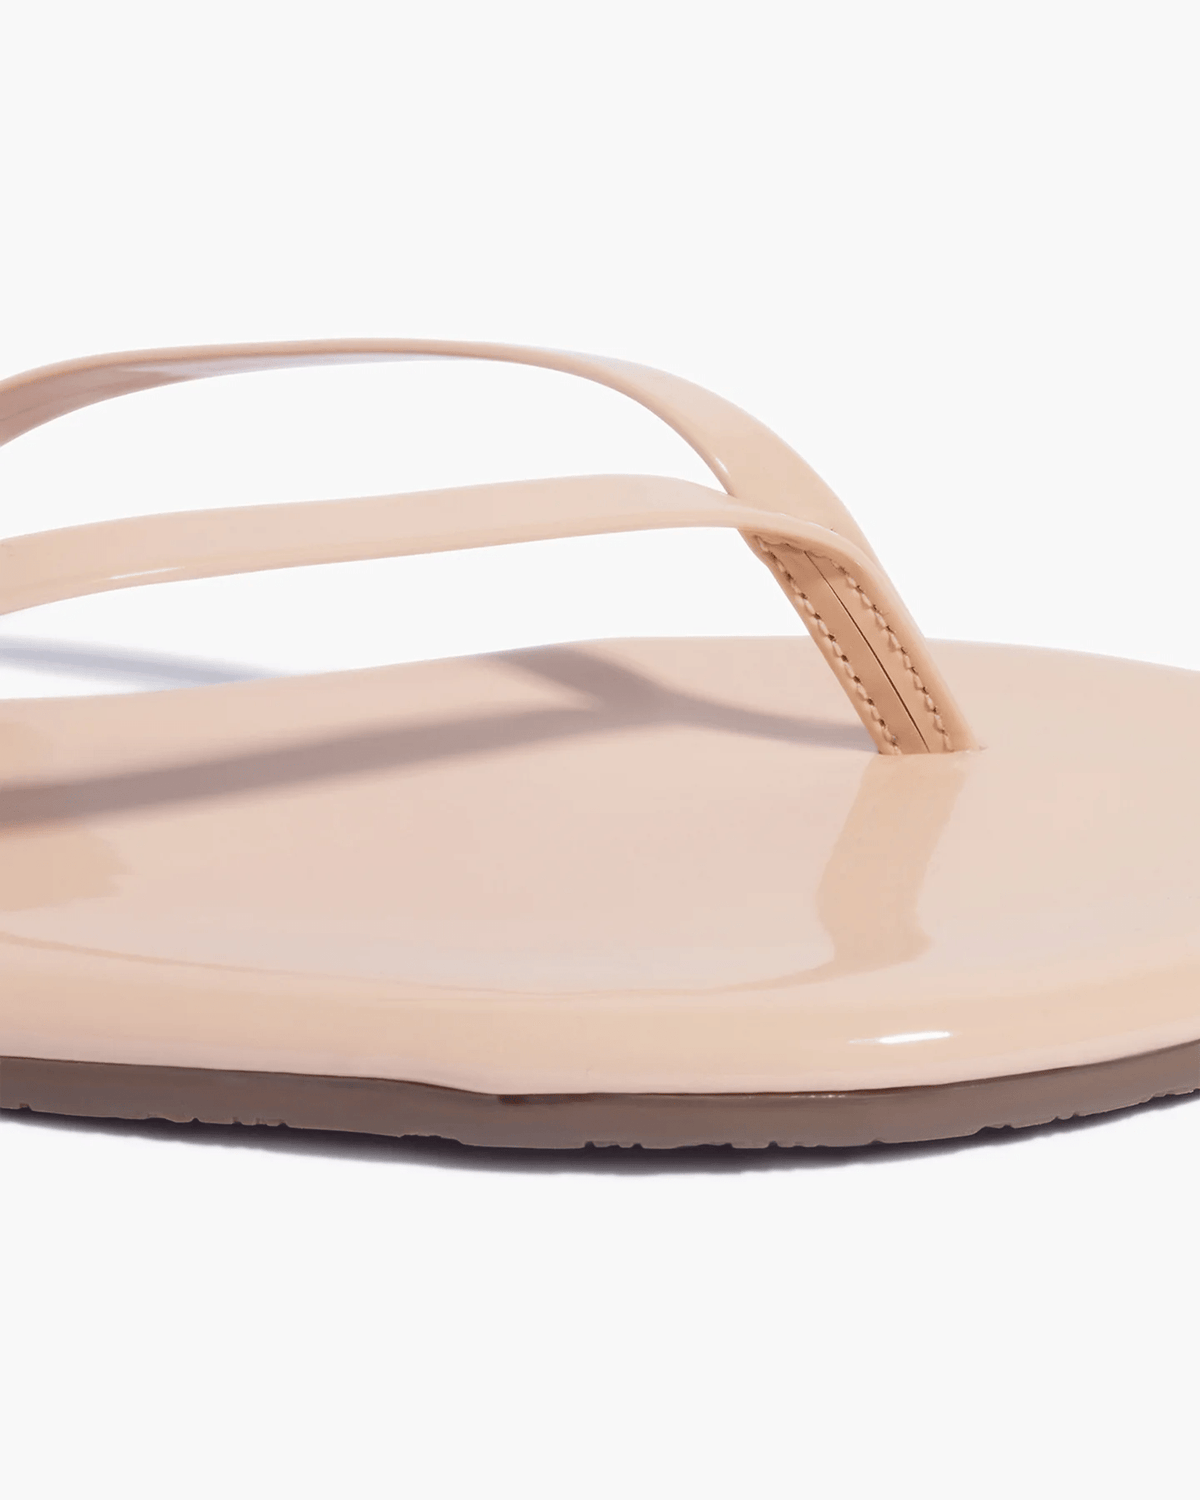 Tkees Shoes Glosses Flip Flop in Rose